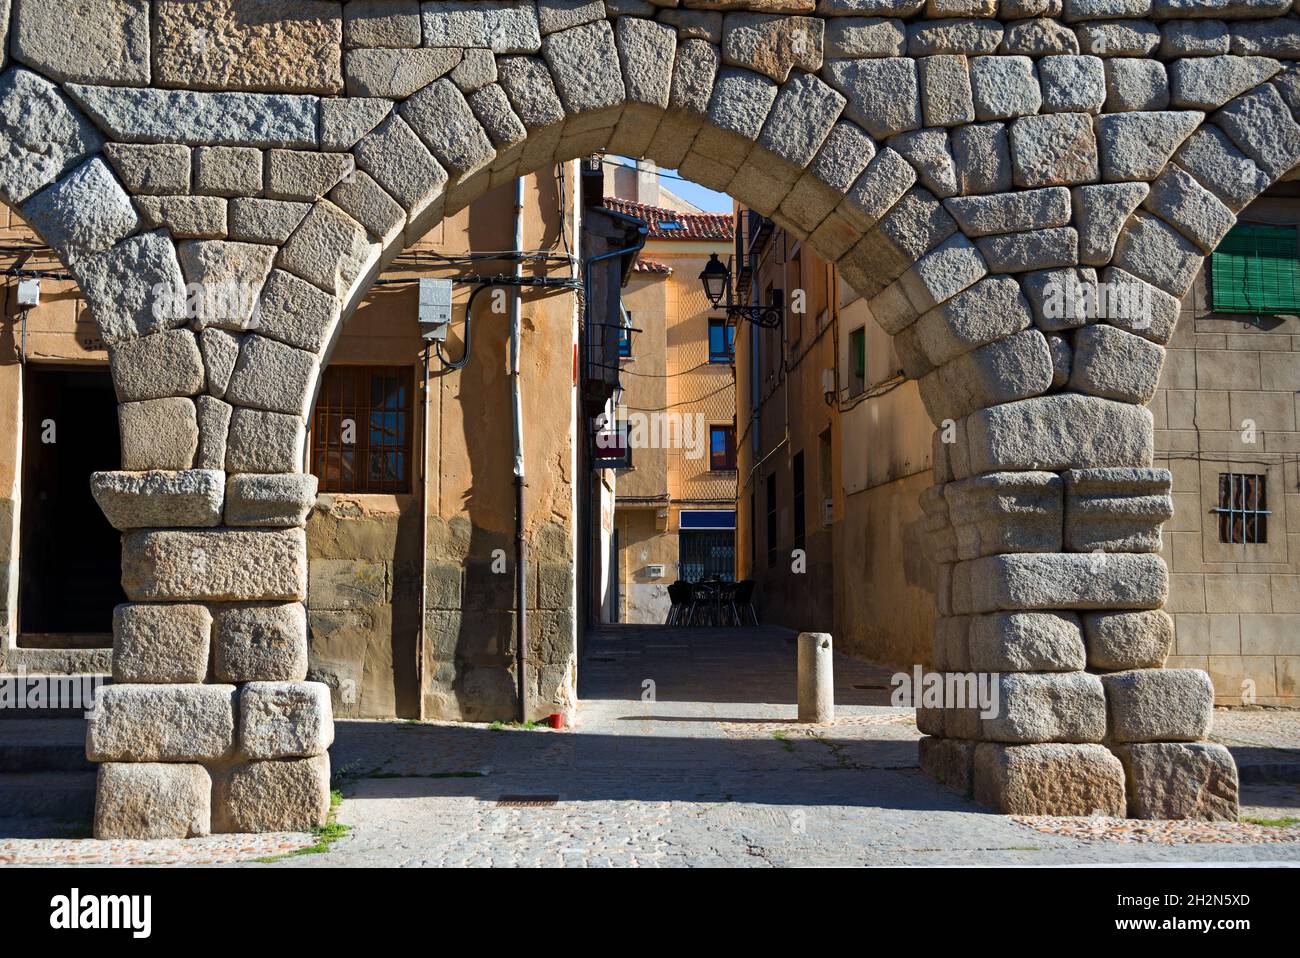 Arch of Roman aqueduct in old city Stock Photo